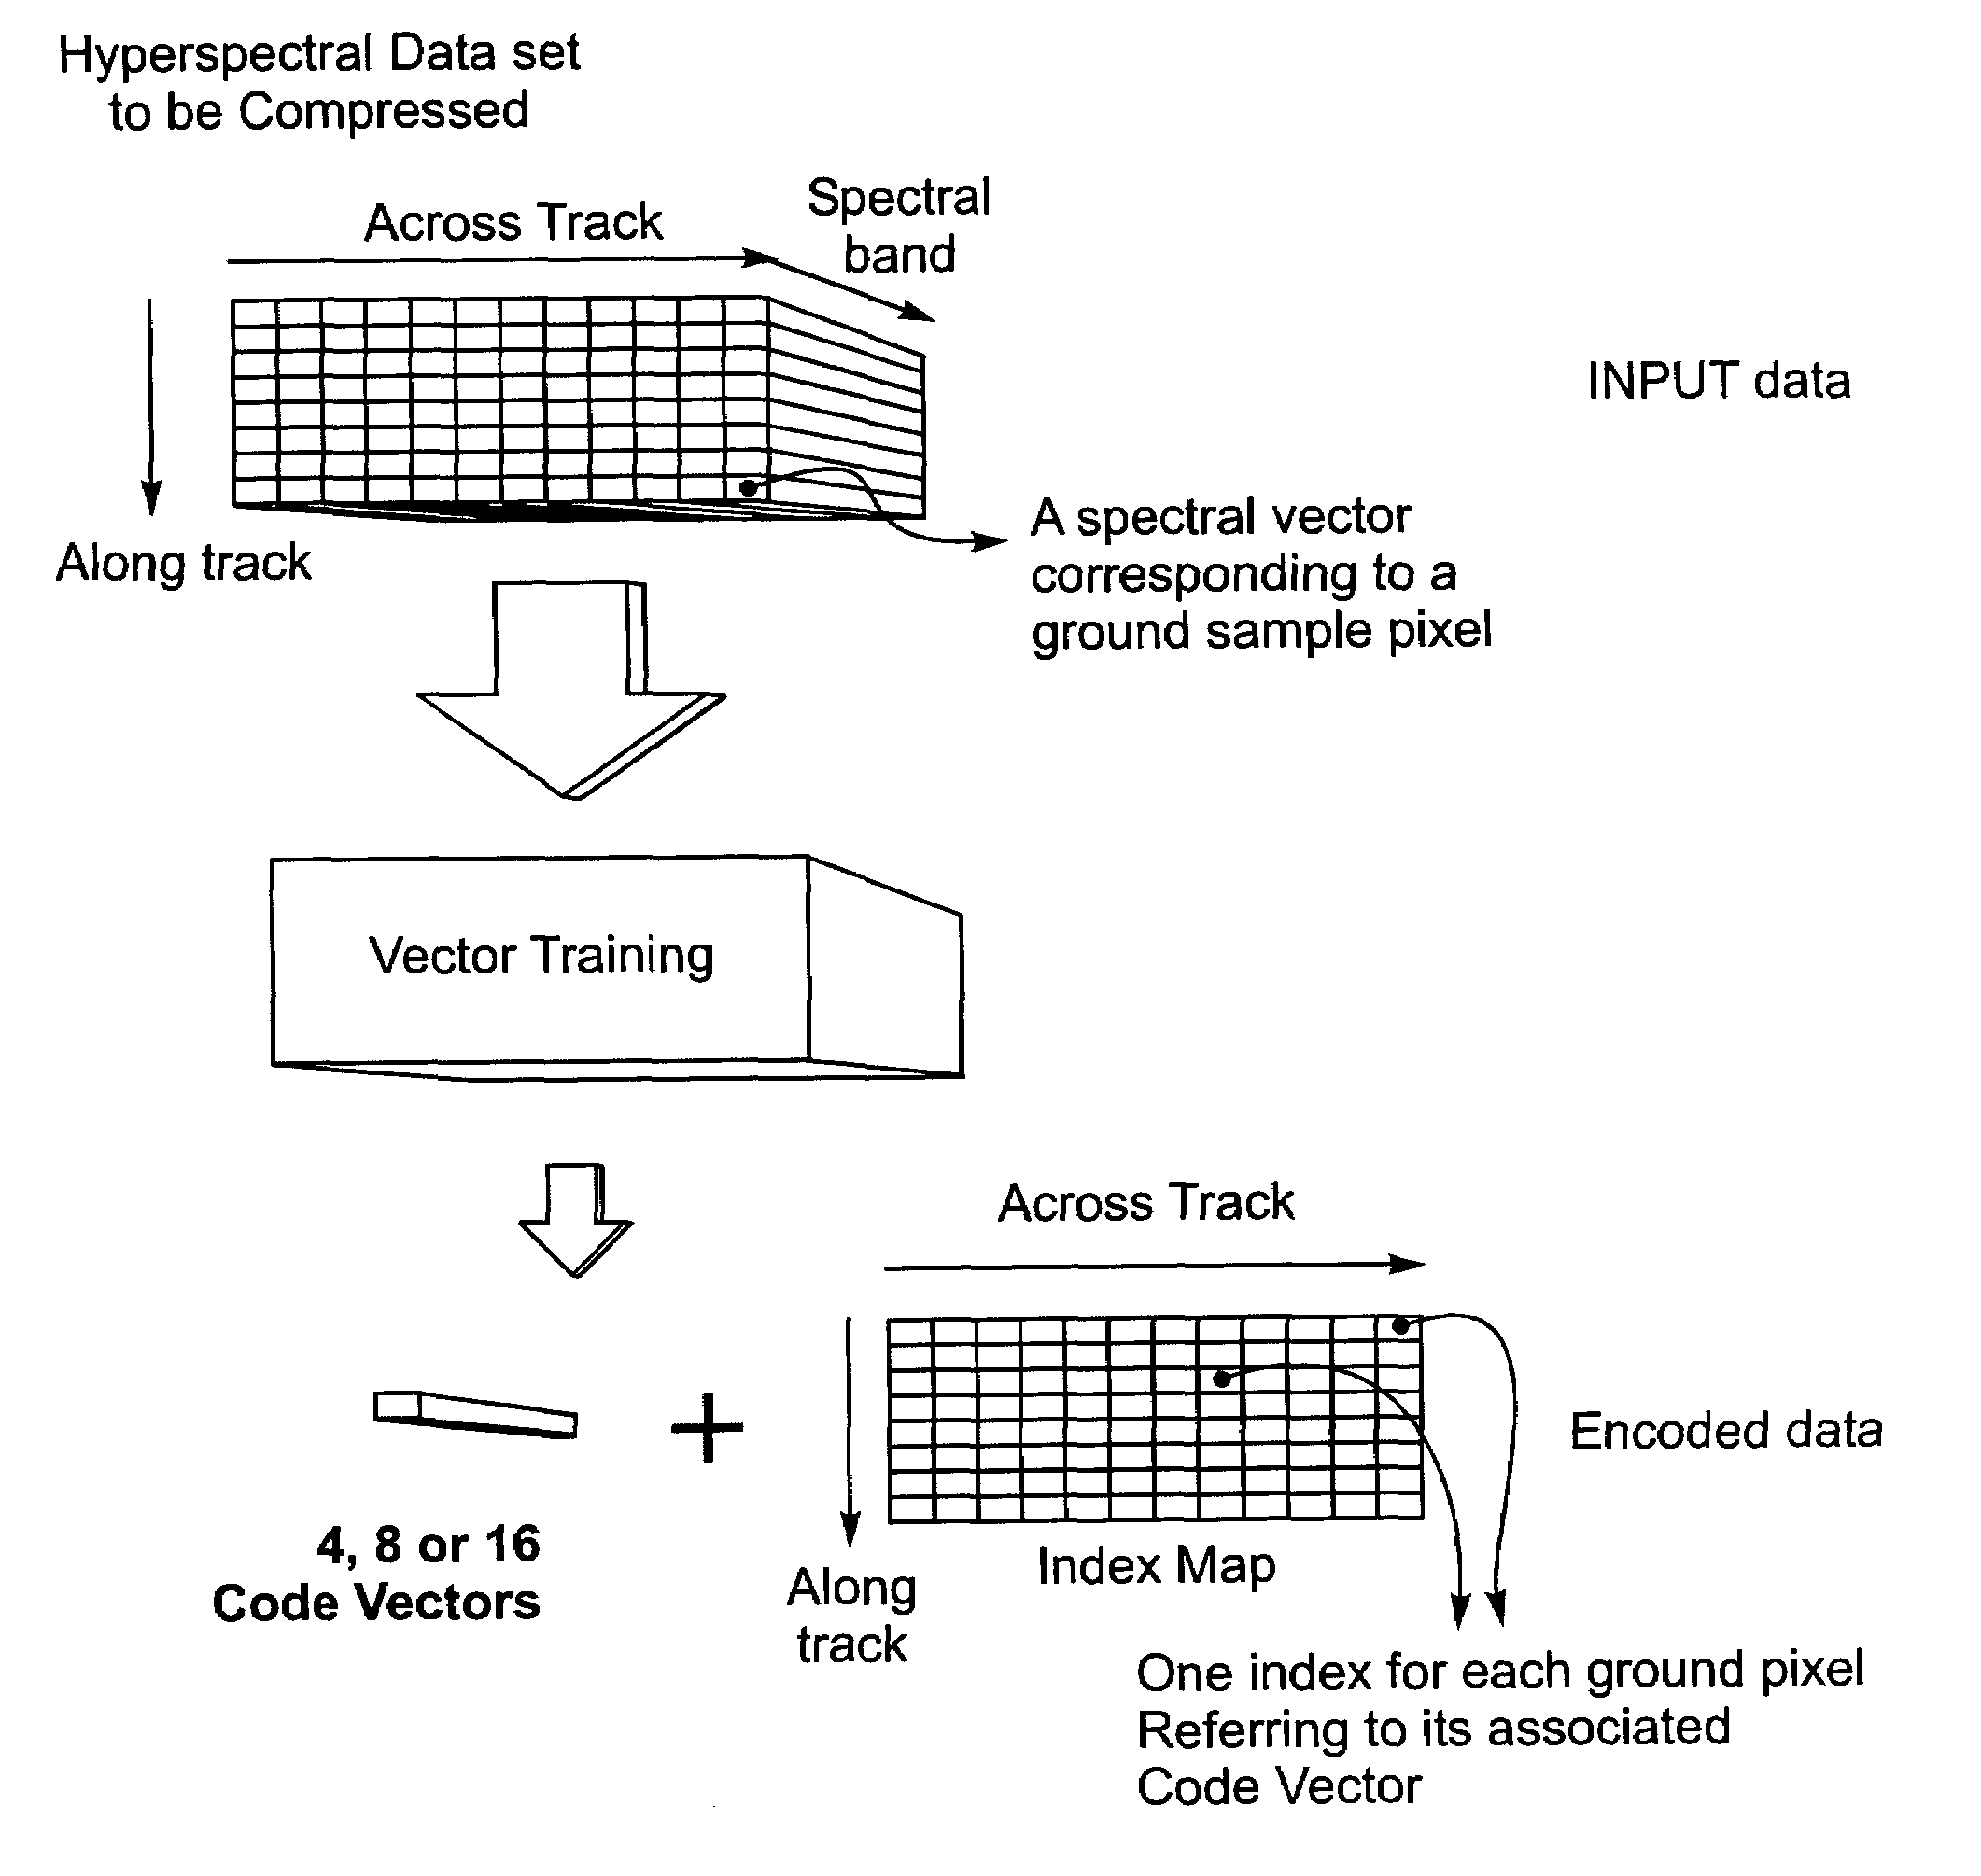 Data compression engines and real-time wideband compressor for multi-dimensional data